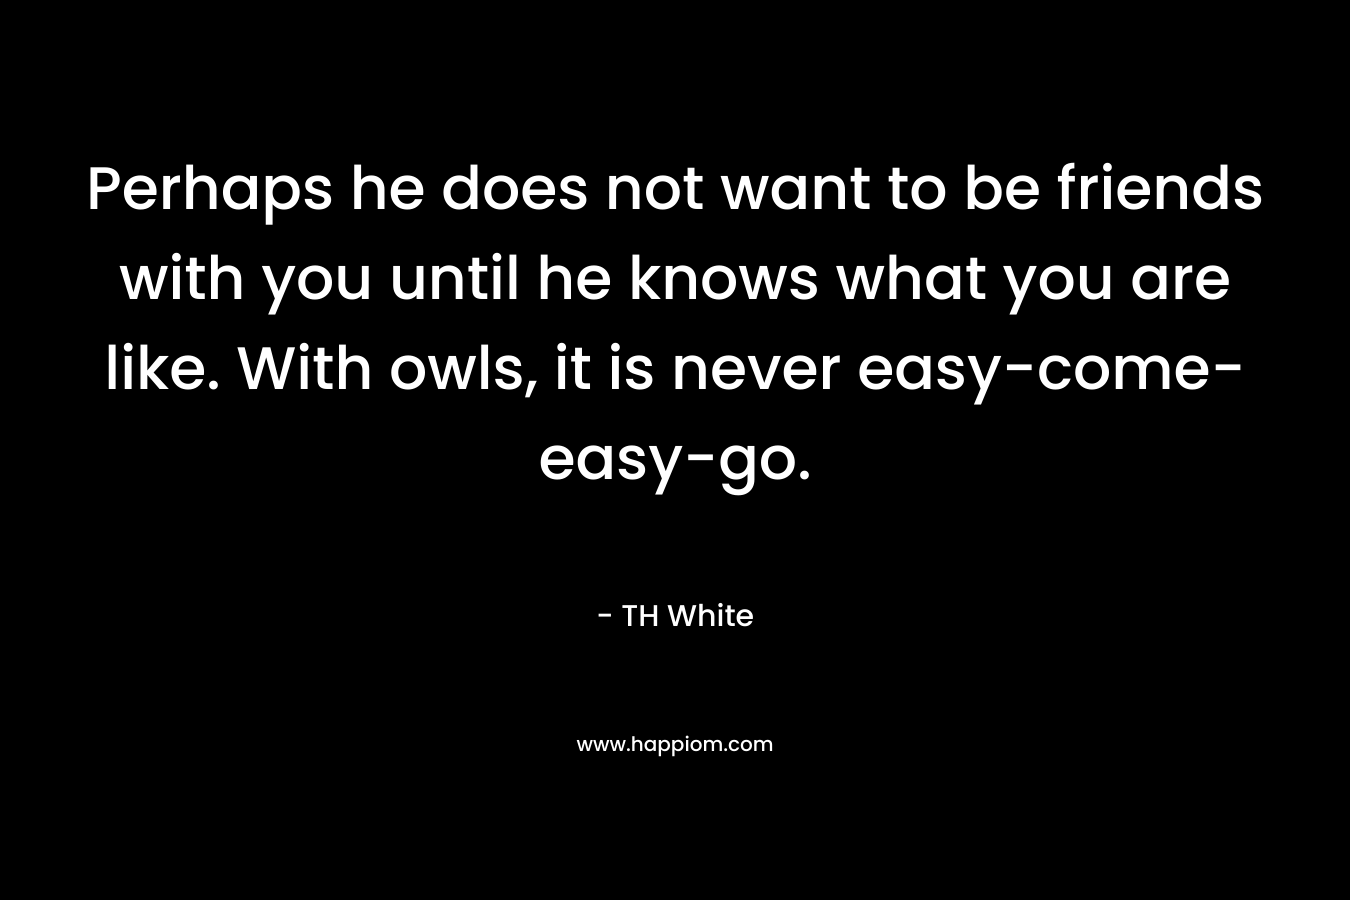 Perhaps he does not want to be friends with you until he knows what you are like. With owls, it is never easy-come-easy-go. – TH White